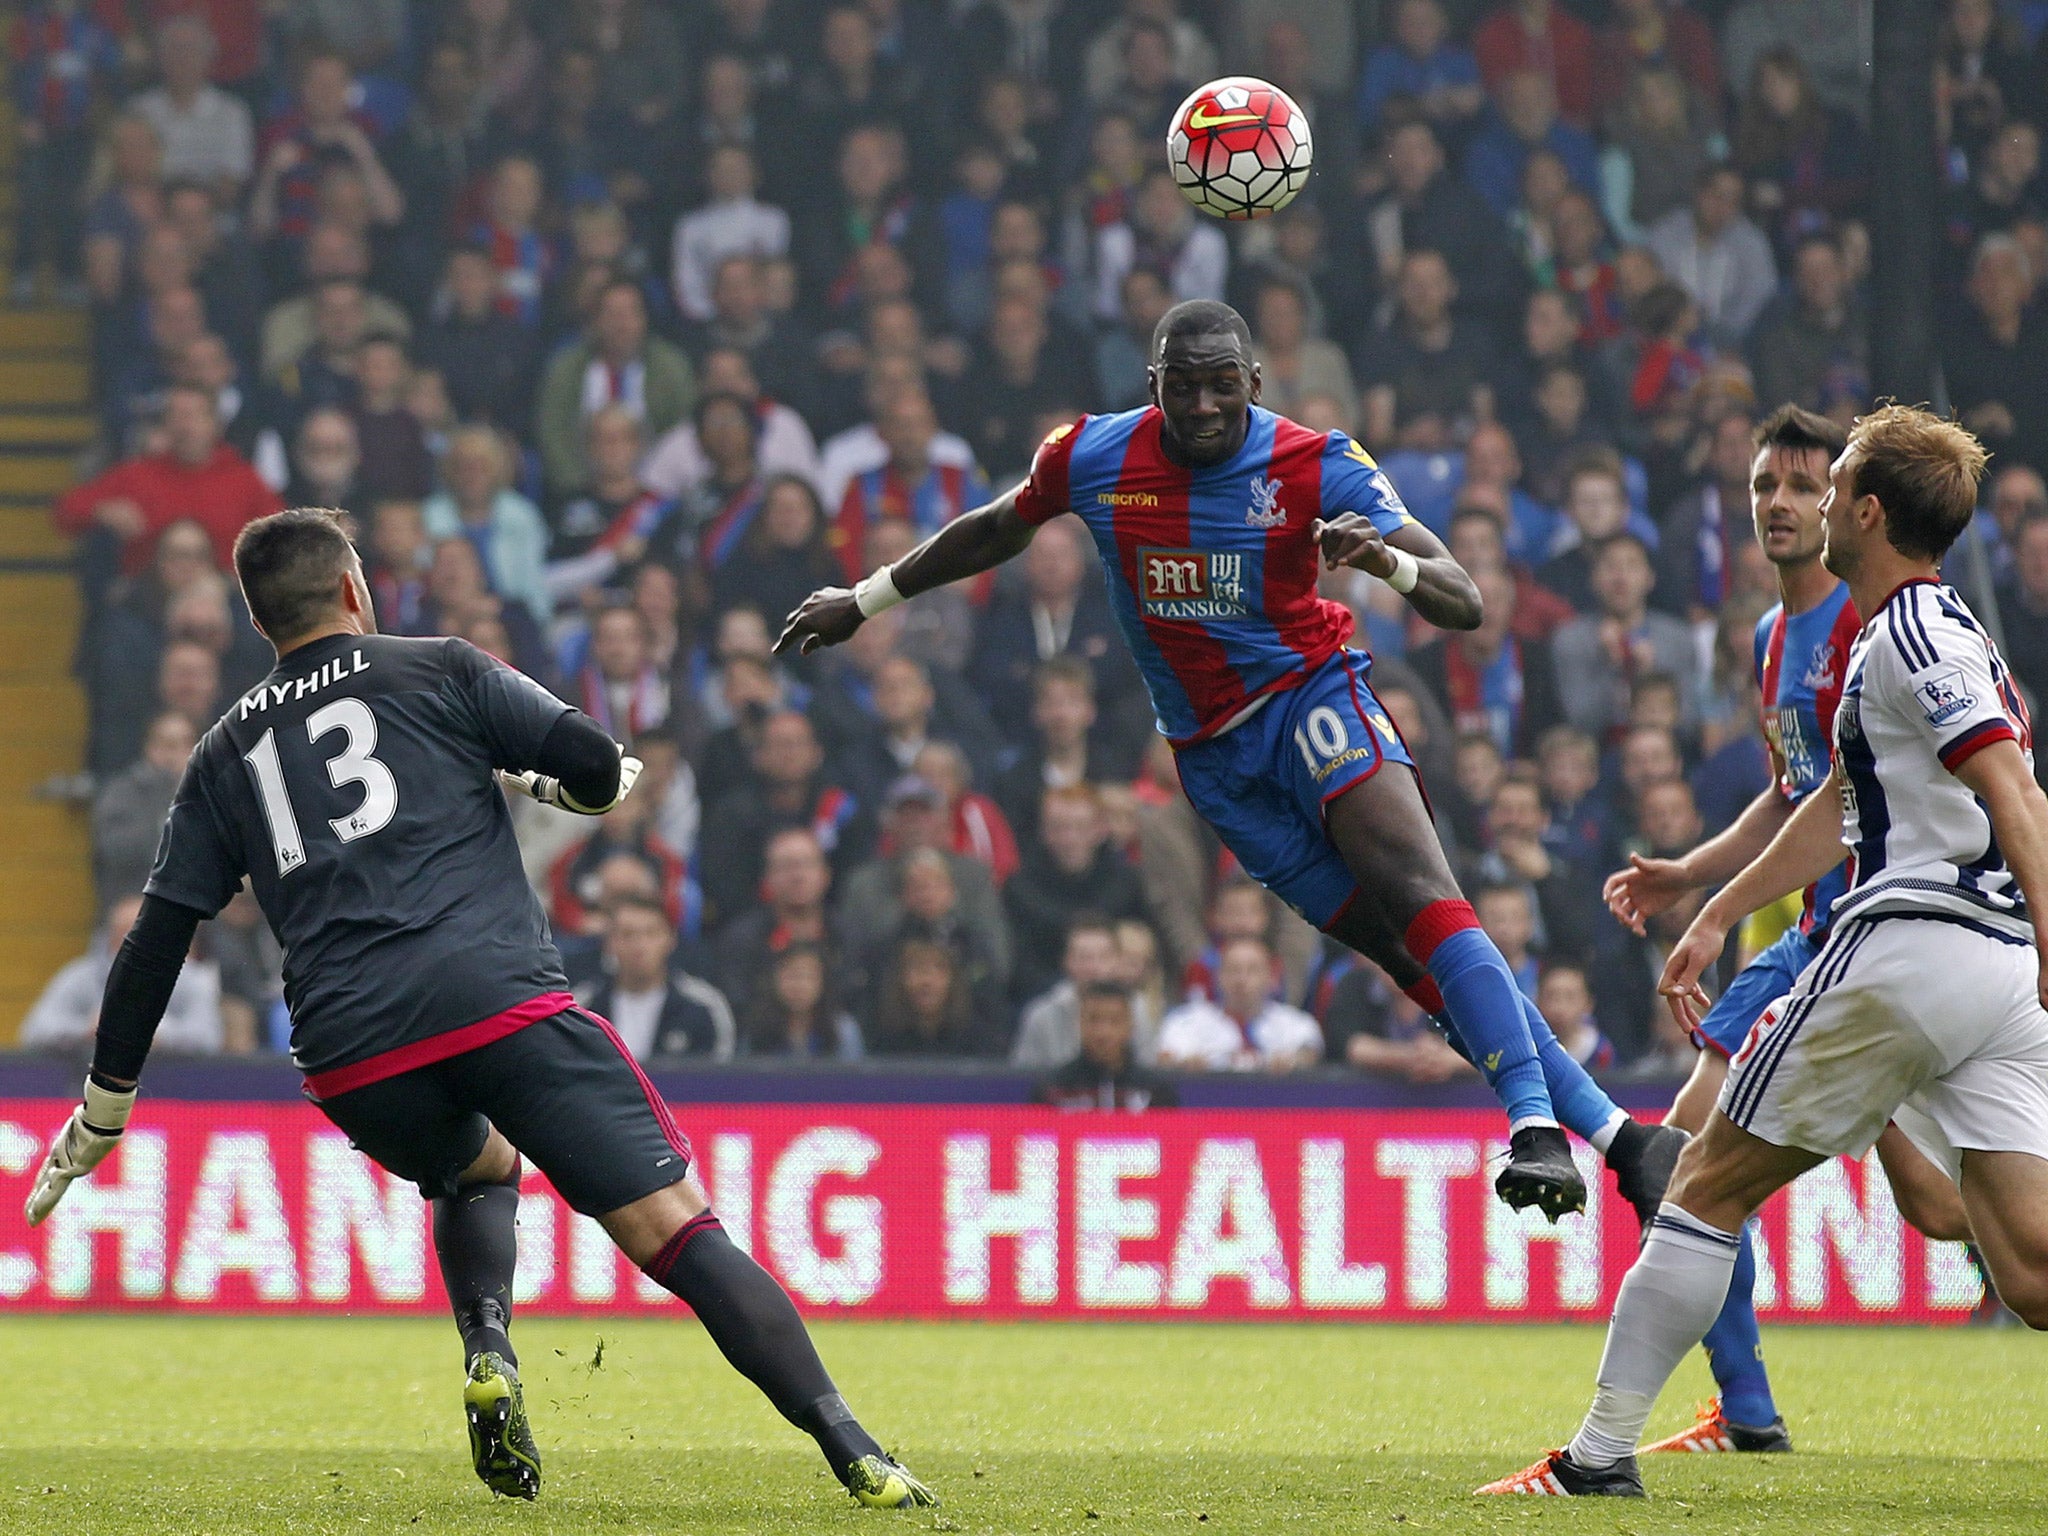 Yannick Bolasie heads past Boaz Myhill for the opening goal